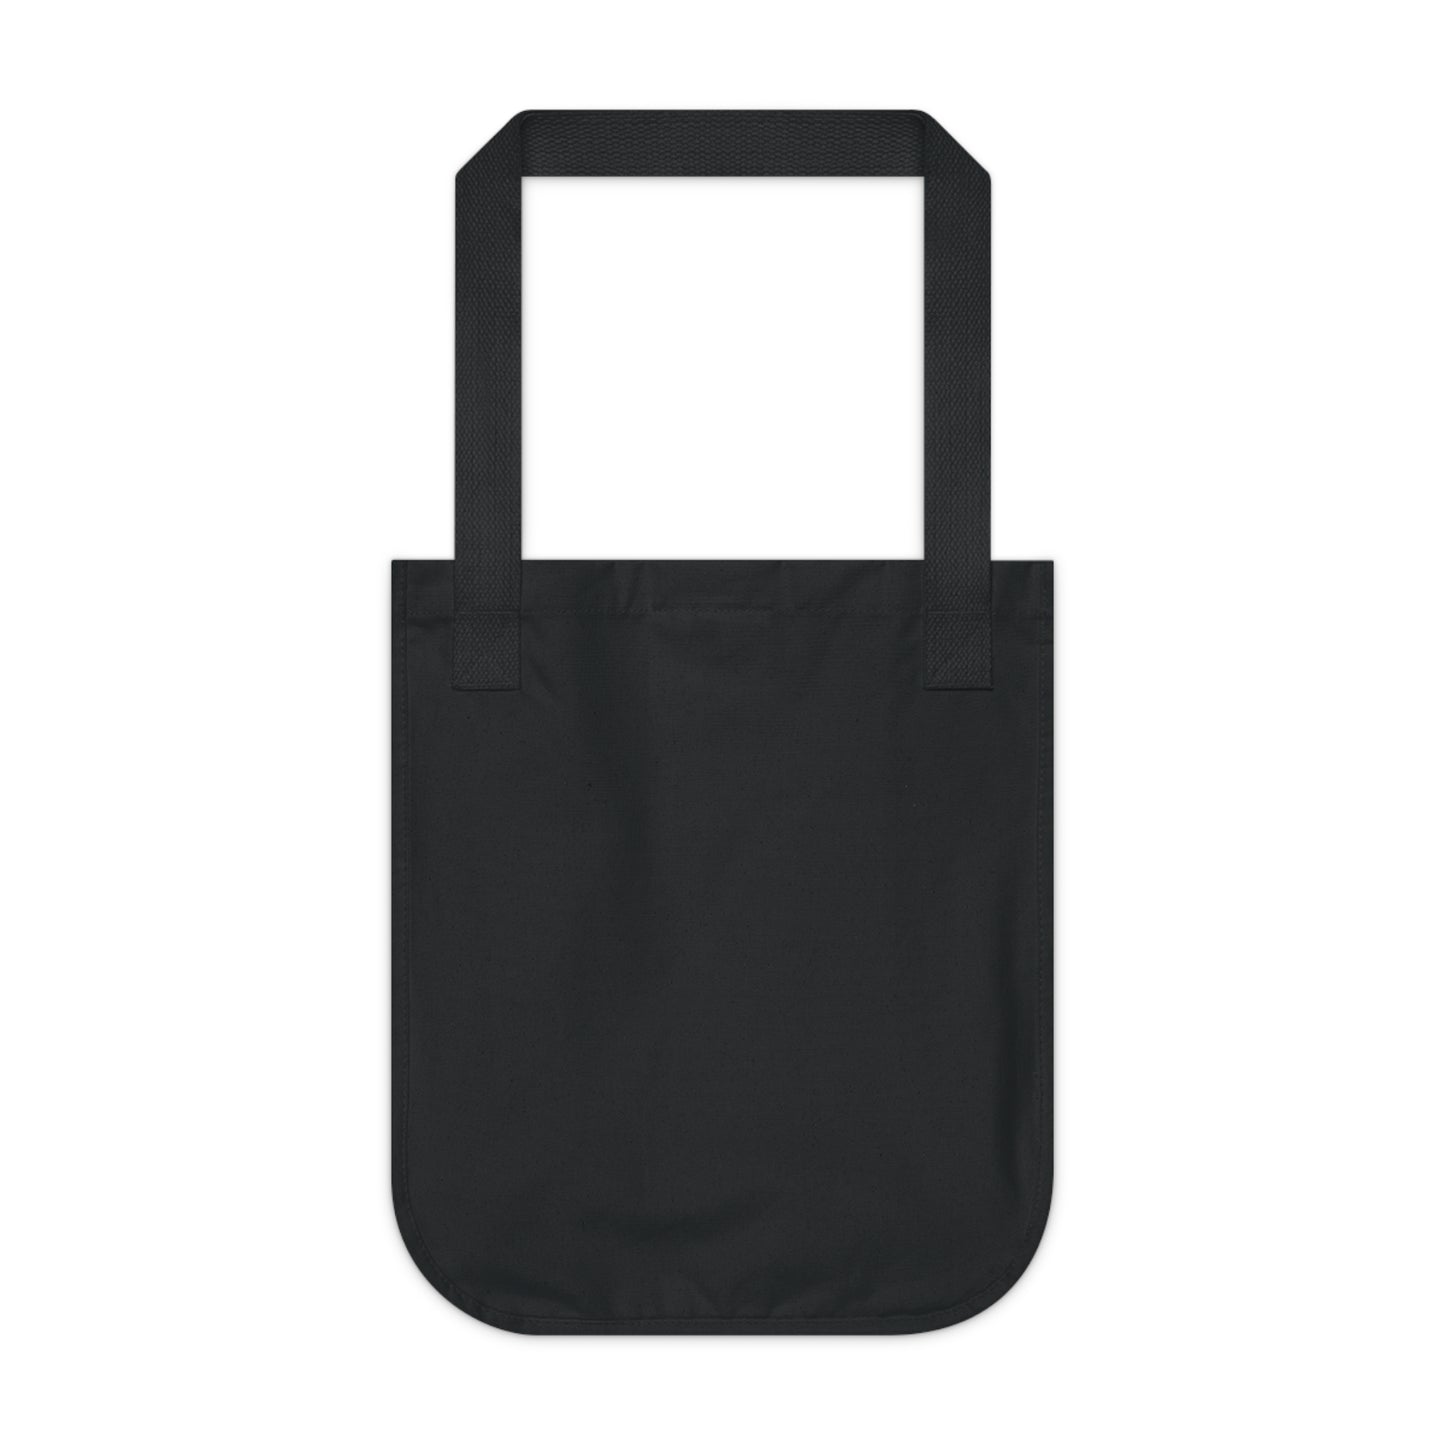 "A Nature-Made Masterpiece" - Bam Boo! Lifestyle Eco-friendly Tote Bag